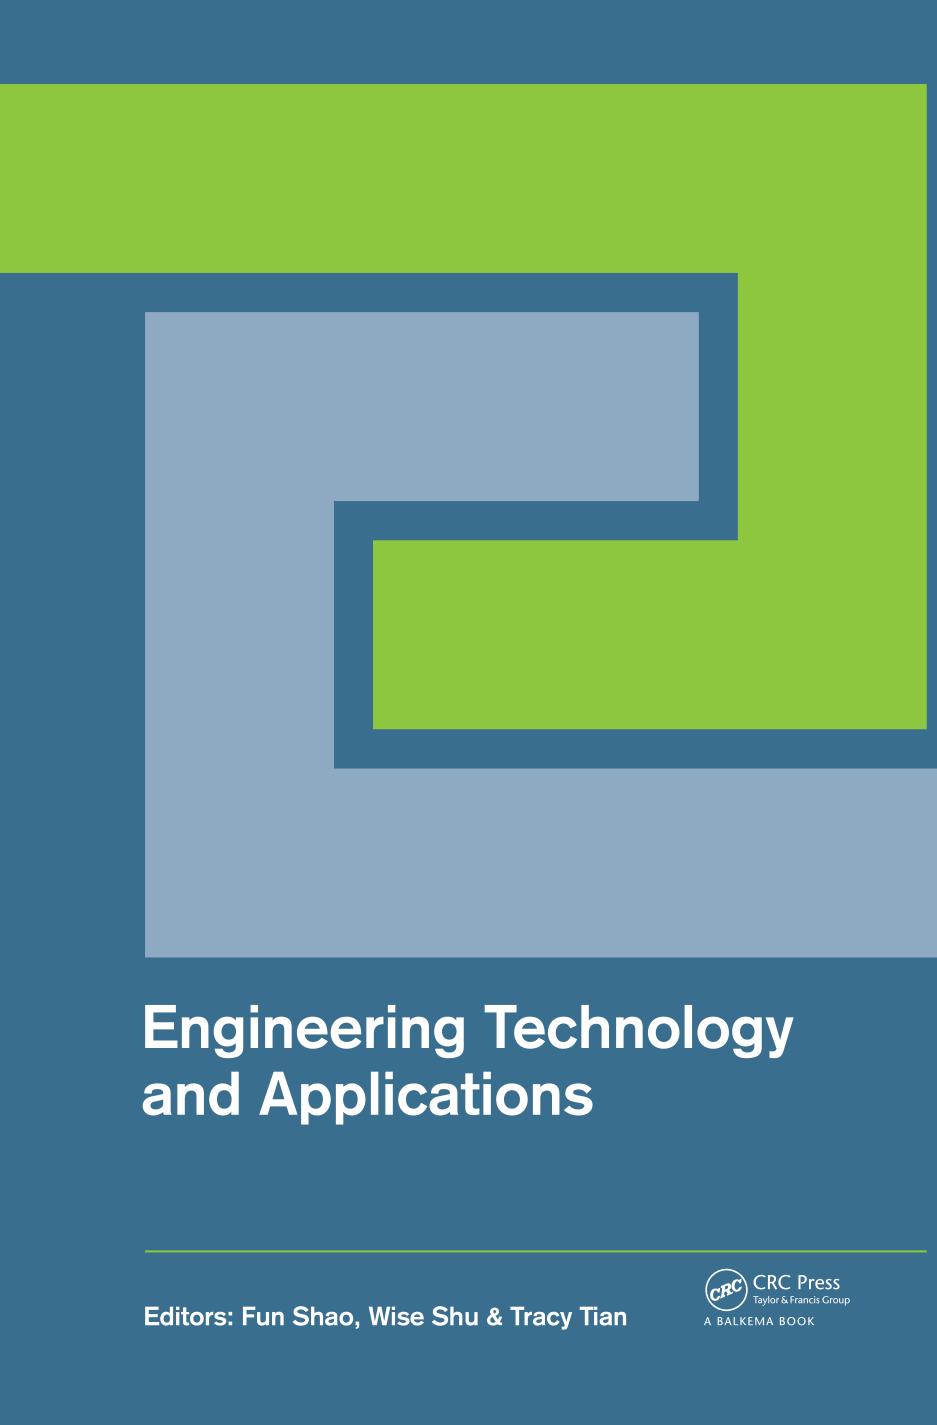 Engineering technology and applications : proceedings of the 2014 International Conference on Engineering Technology and Applications (ICETA 2014), Tsingtao, China, 29-30 April 2014